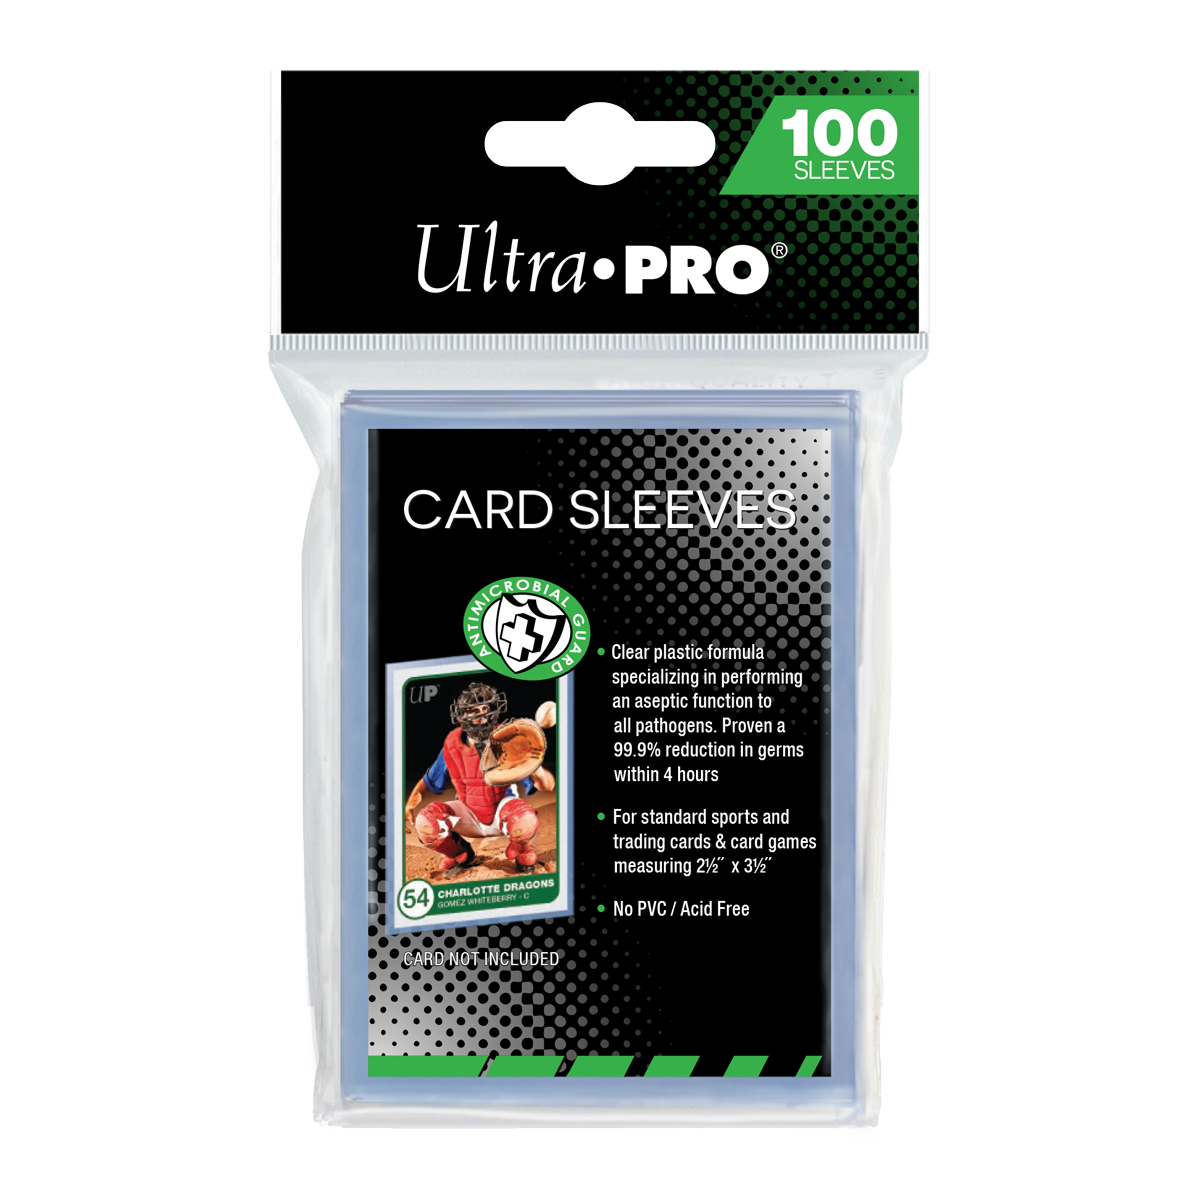 Anti-Microbial Guard Card Sleeves (100ct) for Standard Trading Cards | Ultra PRO International